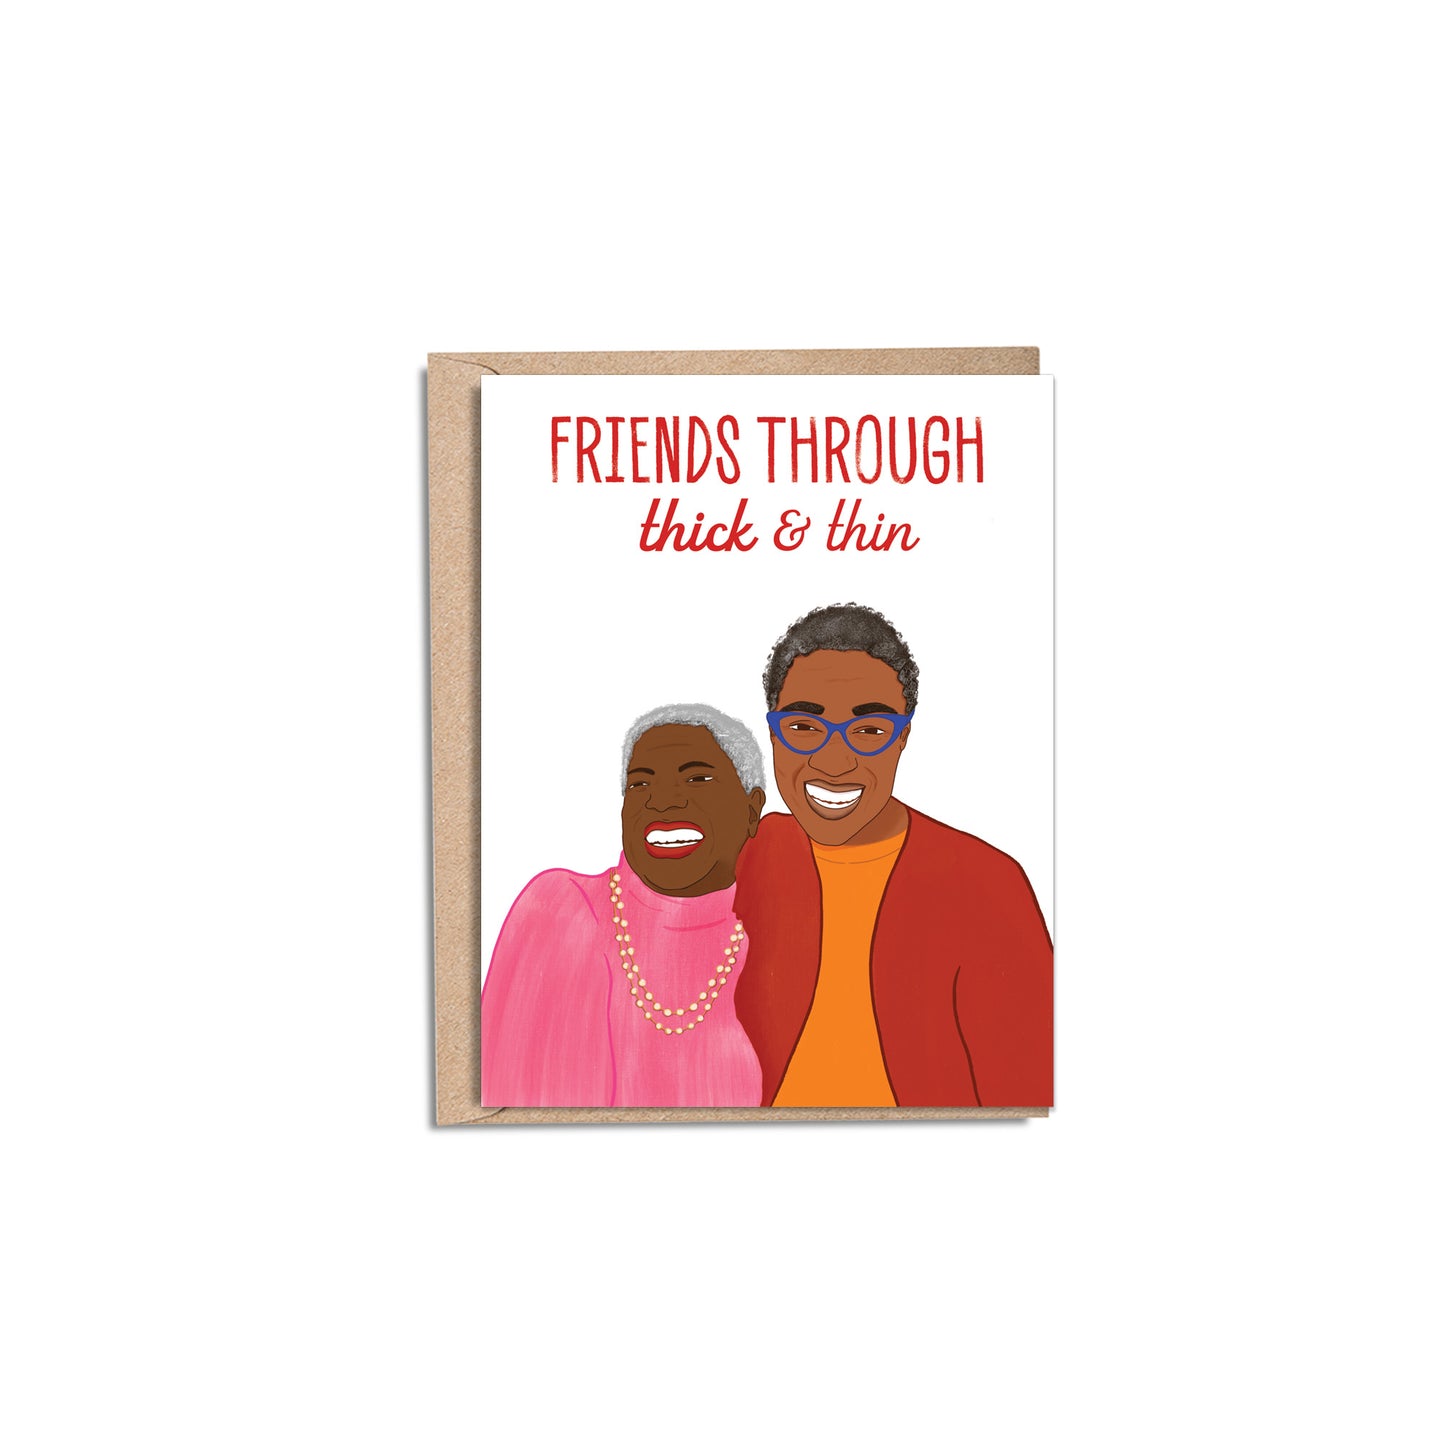 4.25 x 5.5” A2 sized card with an illustration of two Black, African American Women smiling together. The text on the card reads ‘Friends through thick and thin’ in red. The inside of the card is blank. Envelope included. Black Woman Friendship, Sisterhood card